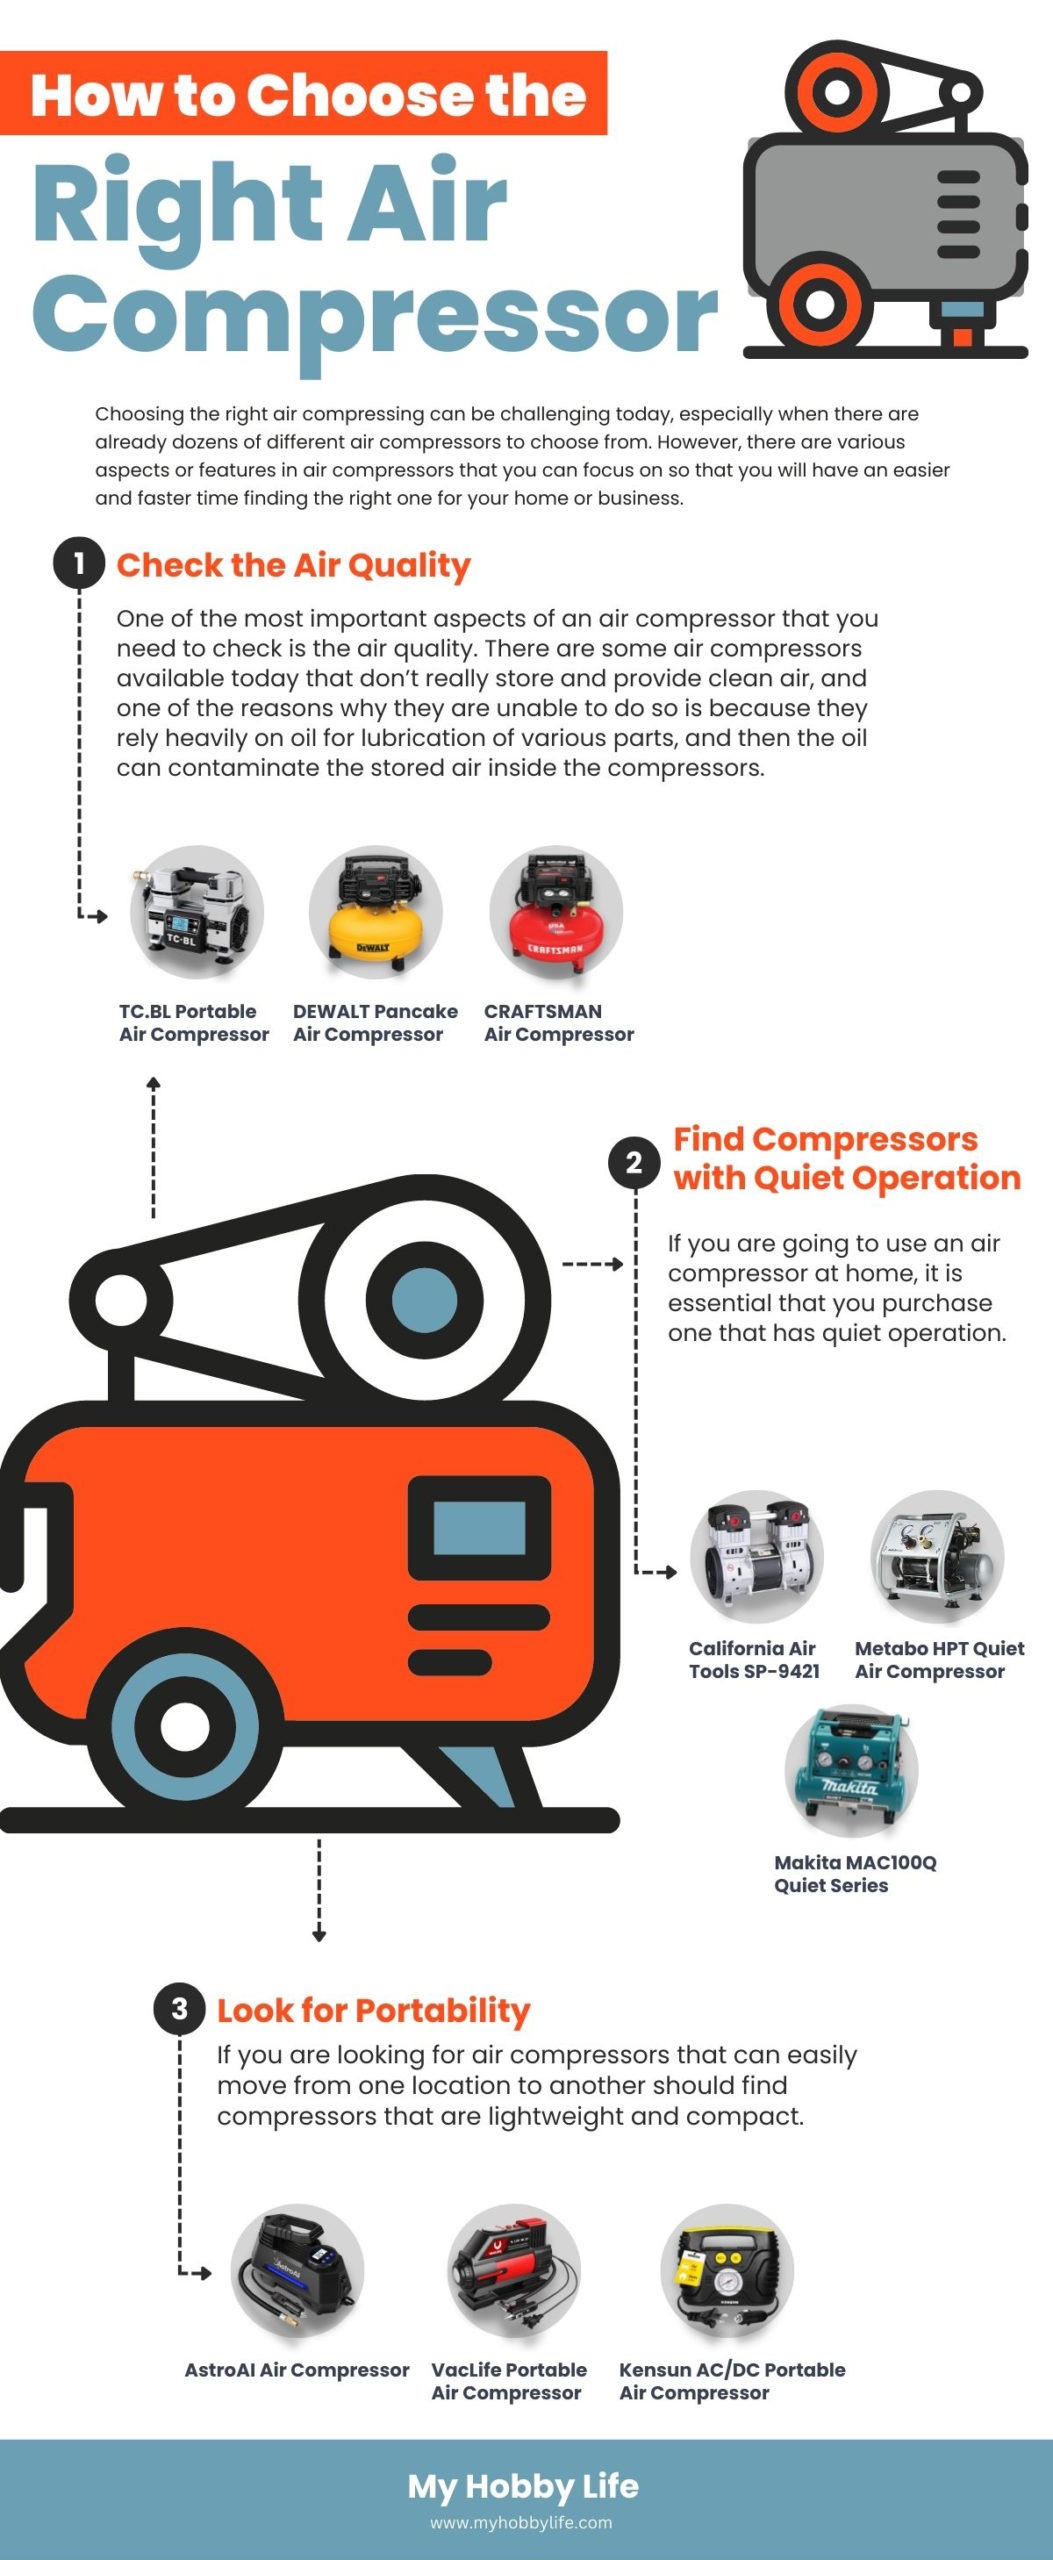 How to Choose the Right Air Compressor